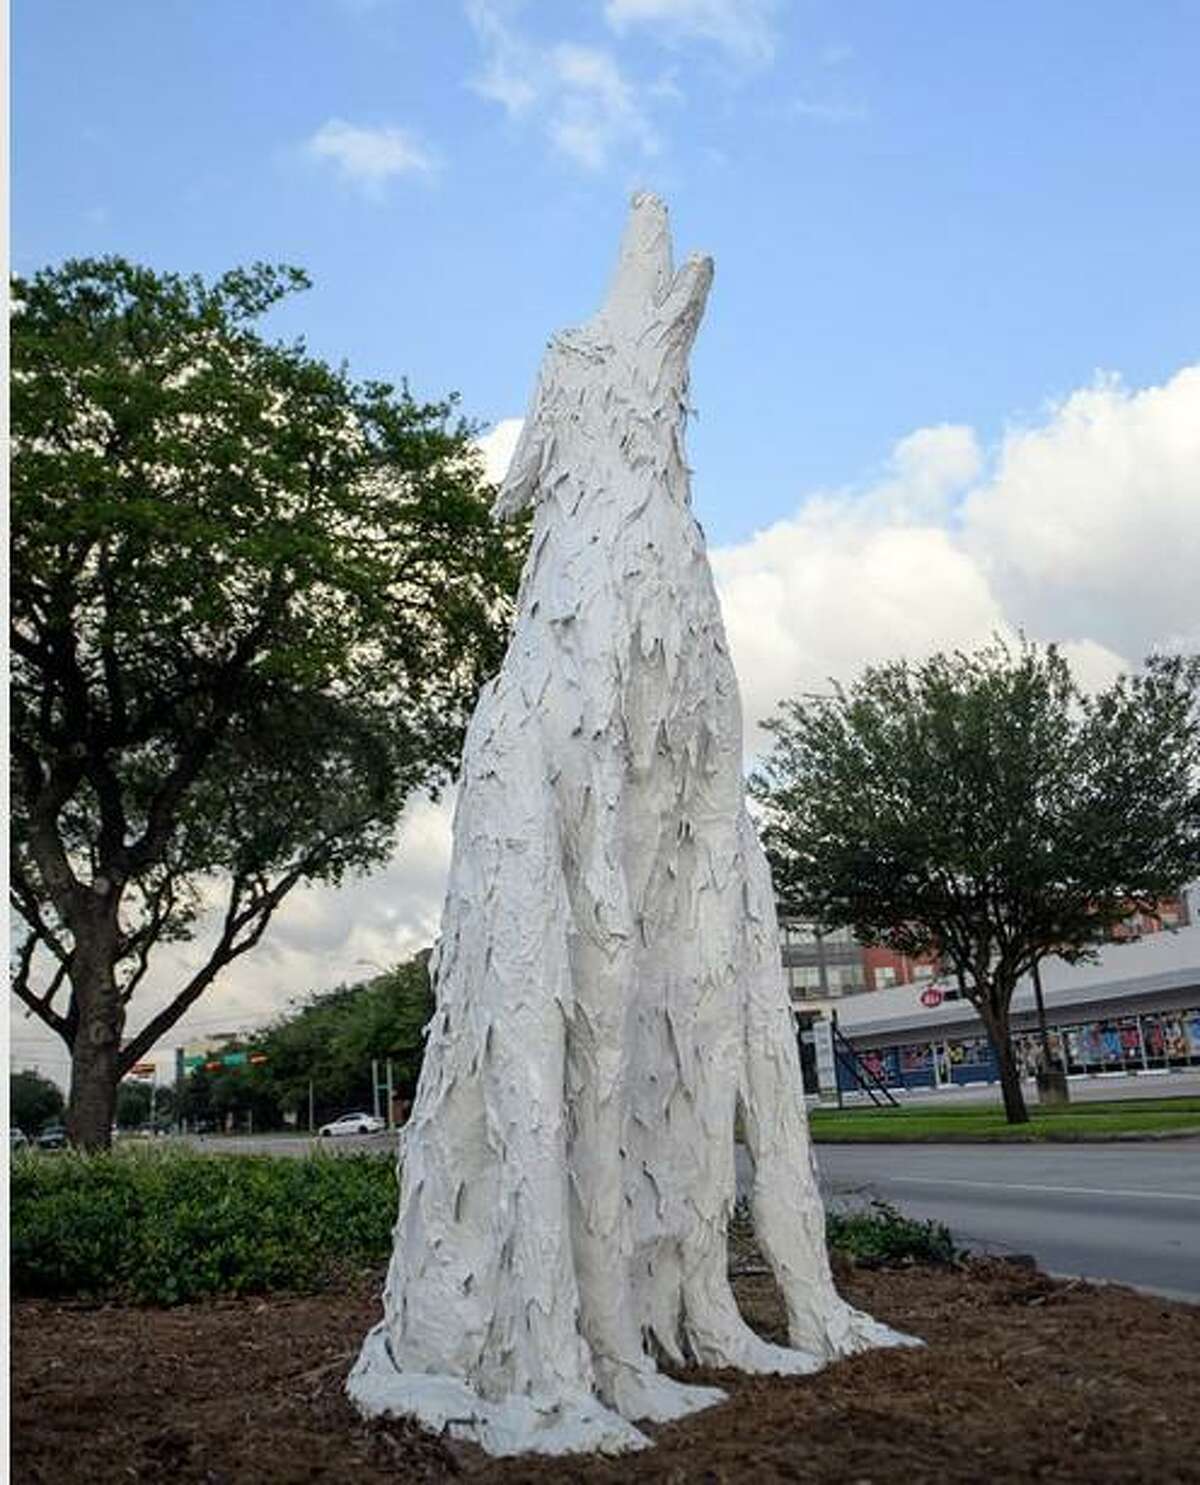 Rachel Gardner's sculpture Howl, which is located by 5539 Richmond Ave. is one of 10 sculptures that are currently up as part of St. George Place Redevelopment Authority/TIRZ 1 Richmond Avenue Public Art Project and will be up through late January.